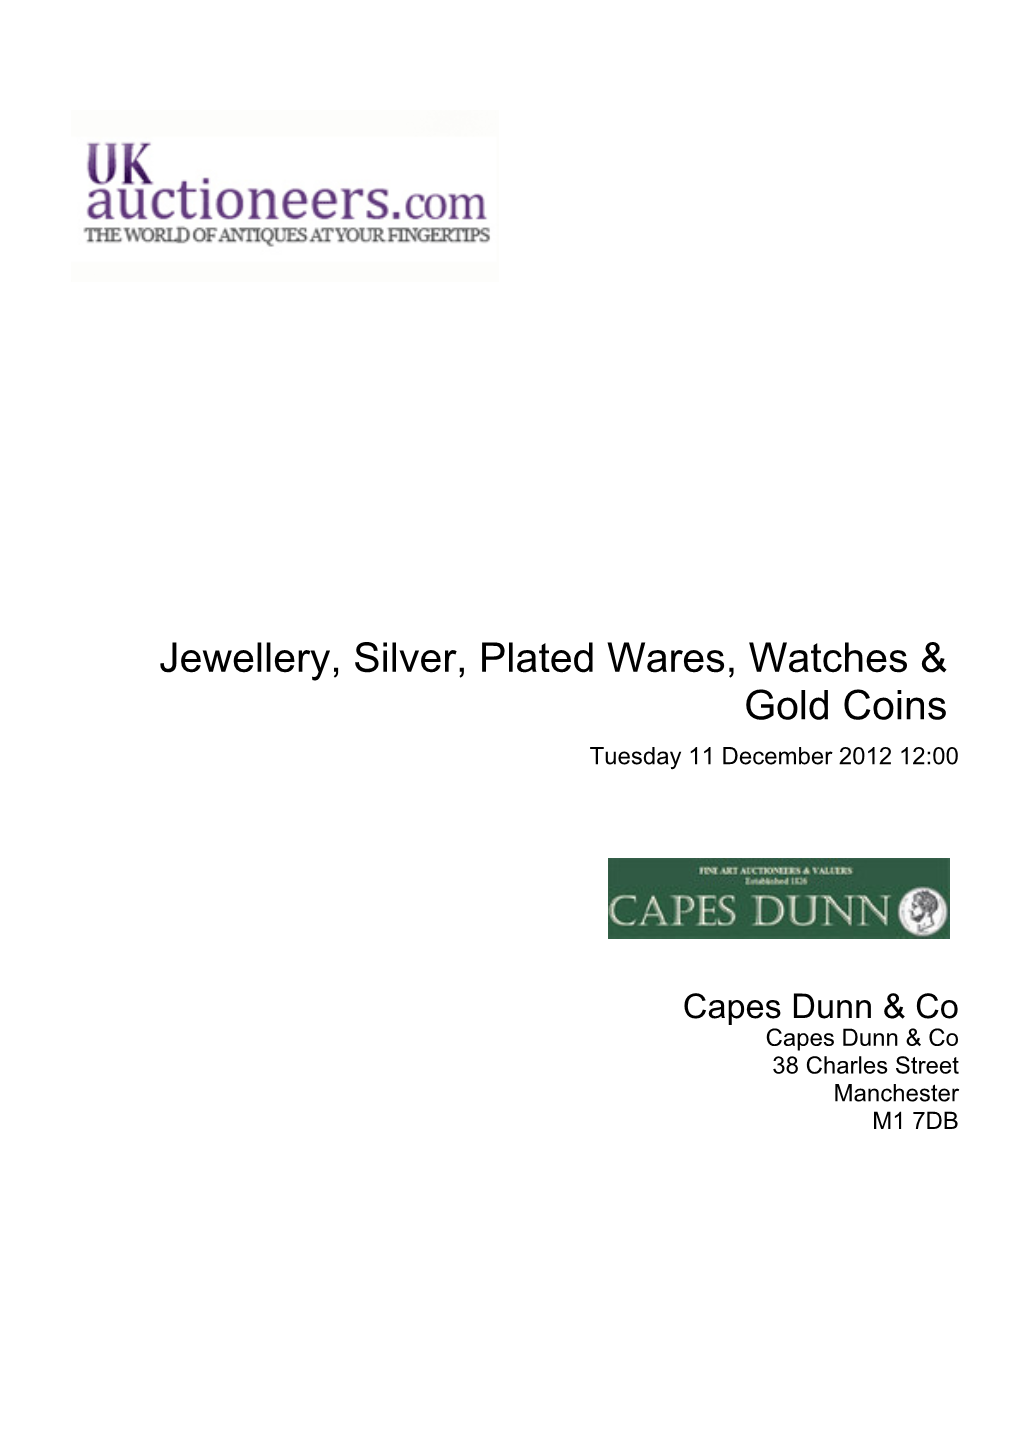 Jewellery, Silver, Plated Wares, Watches & Gold Coins